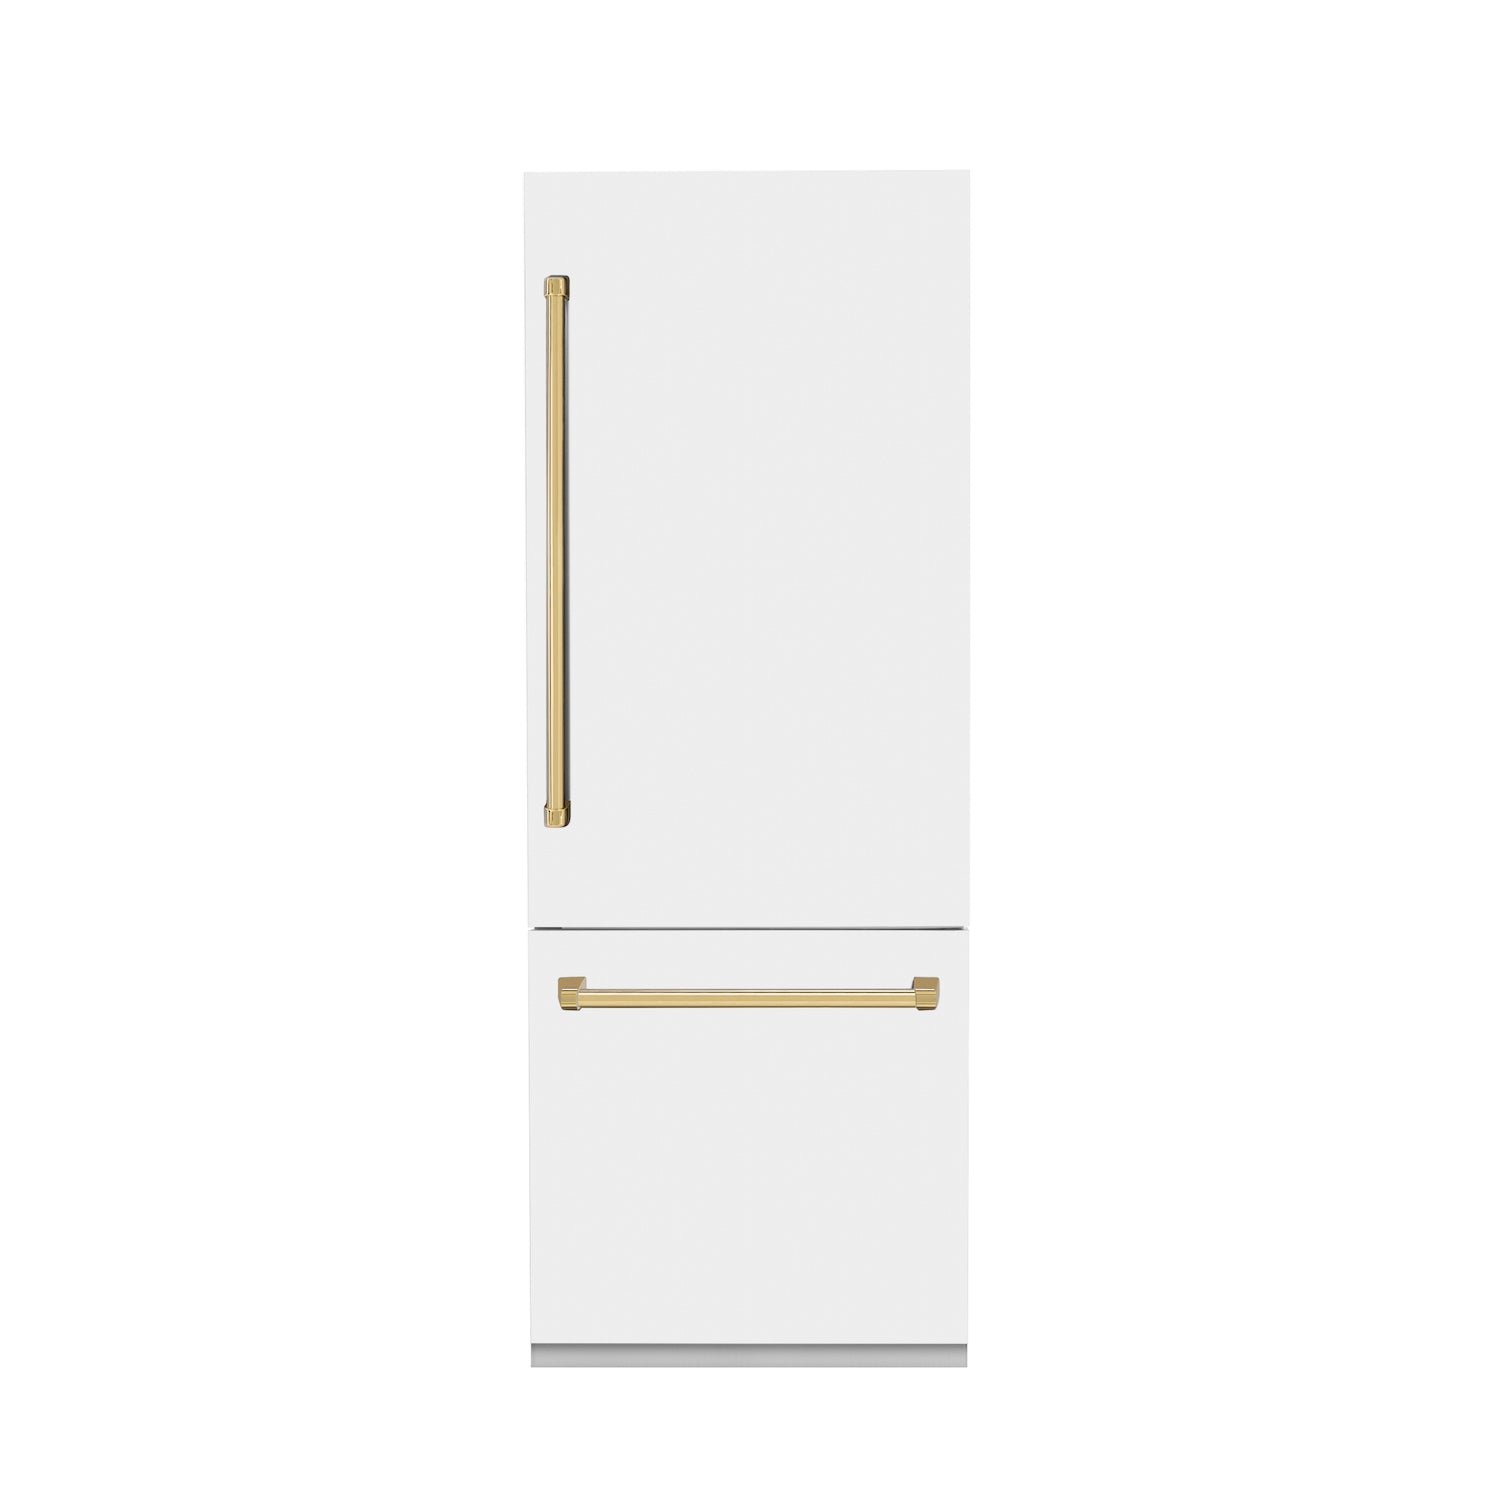 ZLINE 30 in. Autograph Edition Built-in Refrigerator in White Matte with Polished Gold Accents front.